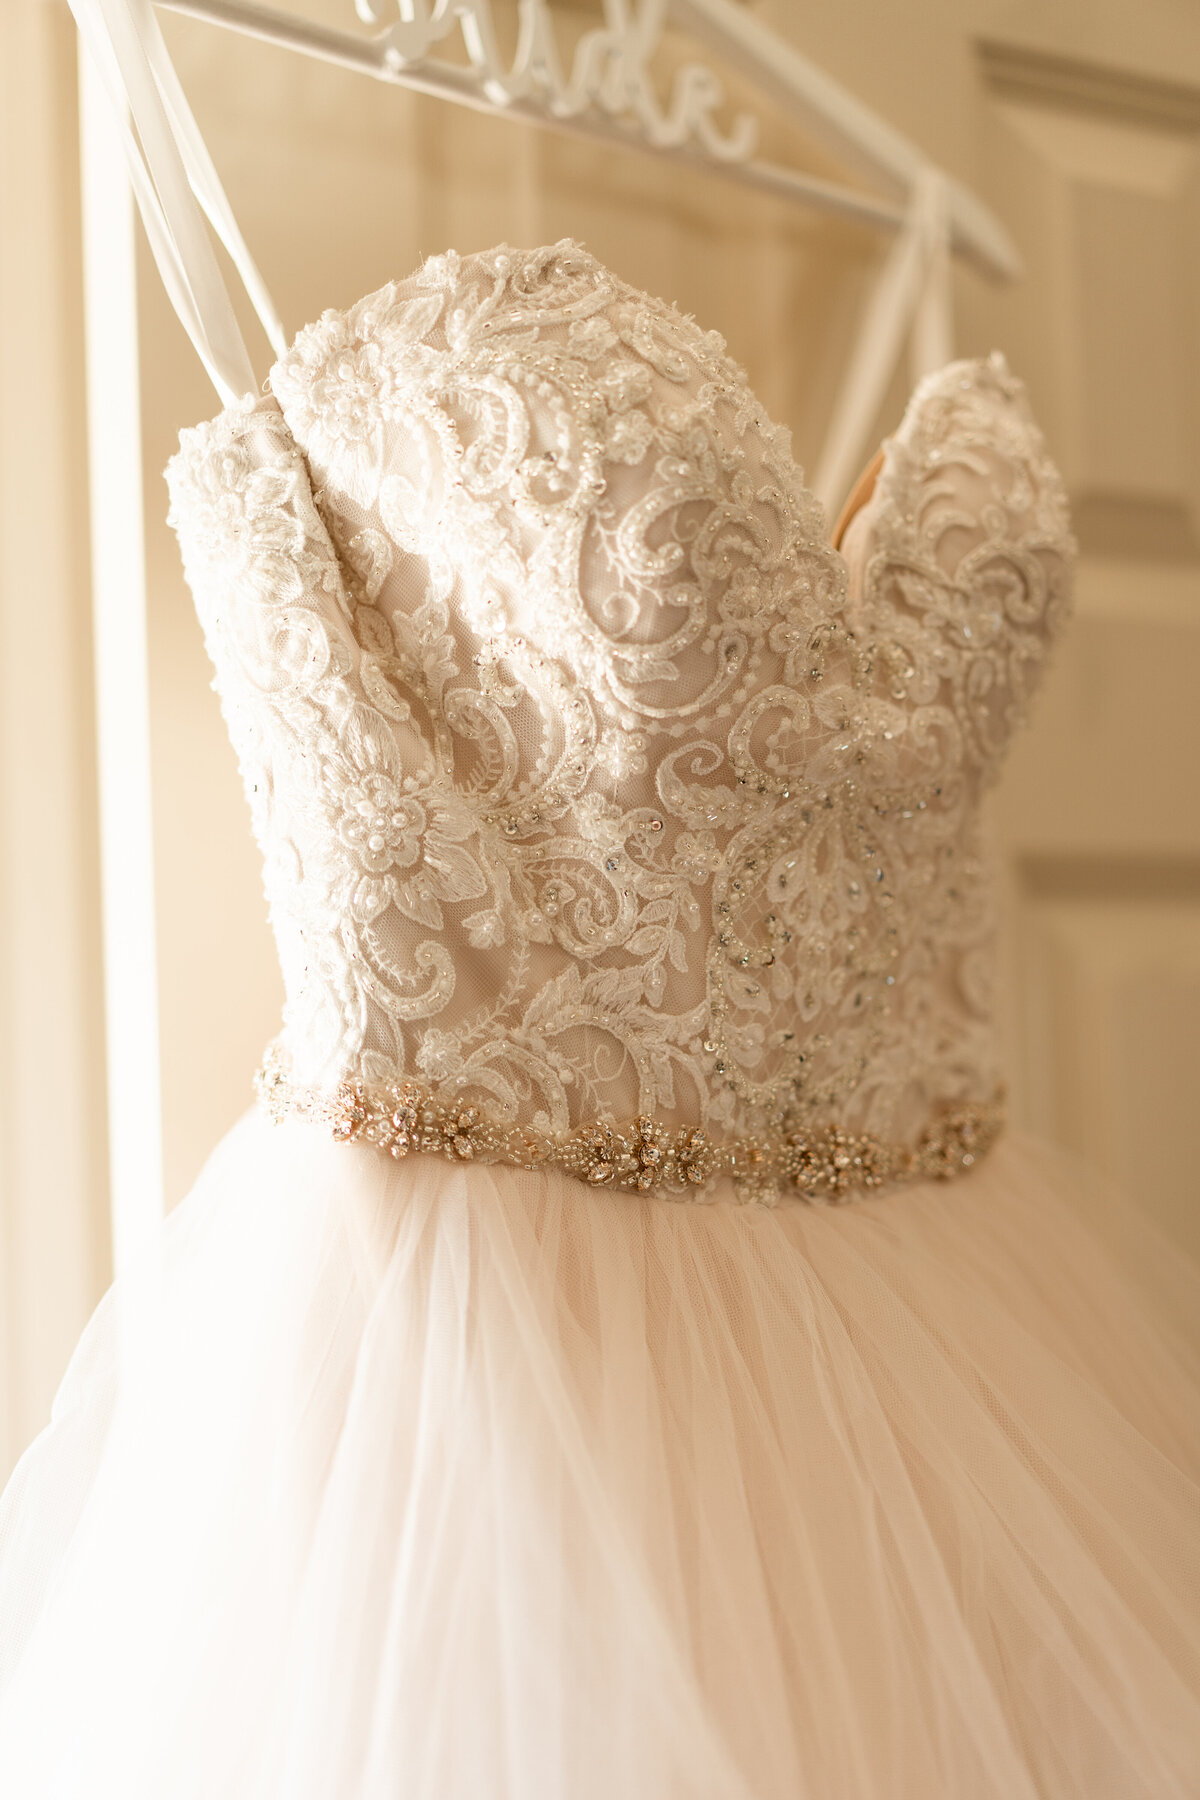 Amber Atchley's wedding dress containing lace, beading and just the right amount of sparkle.